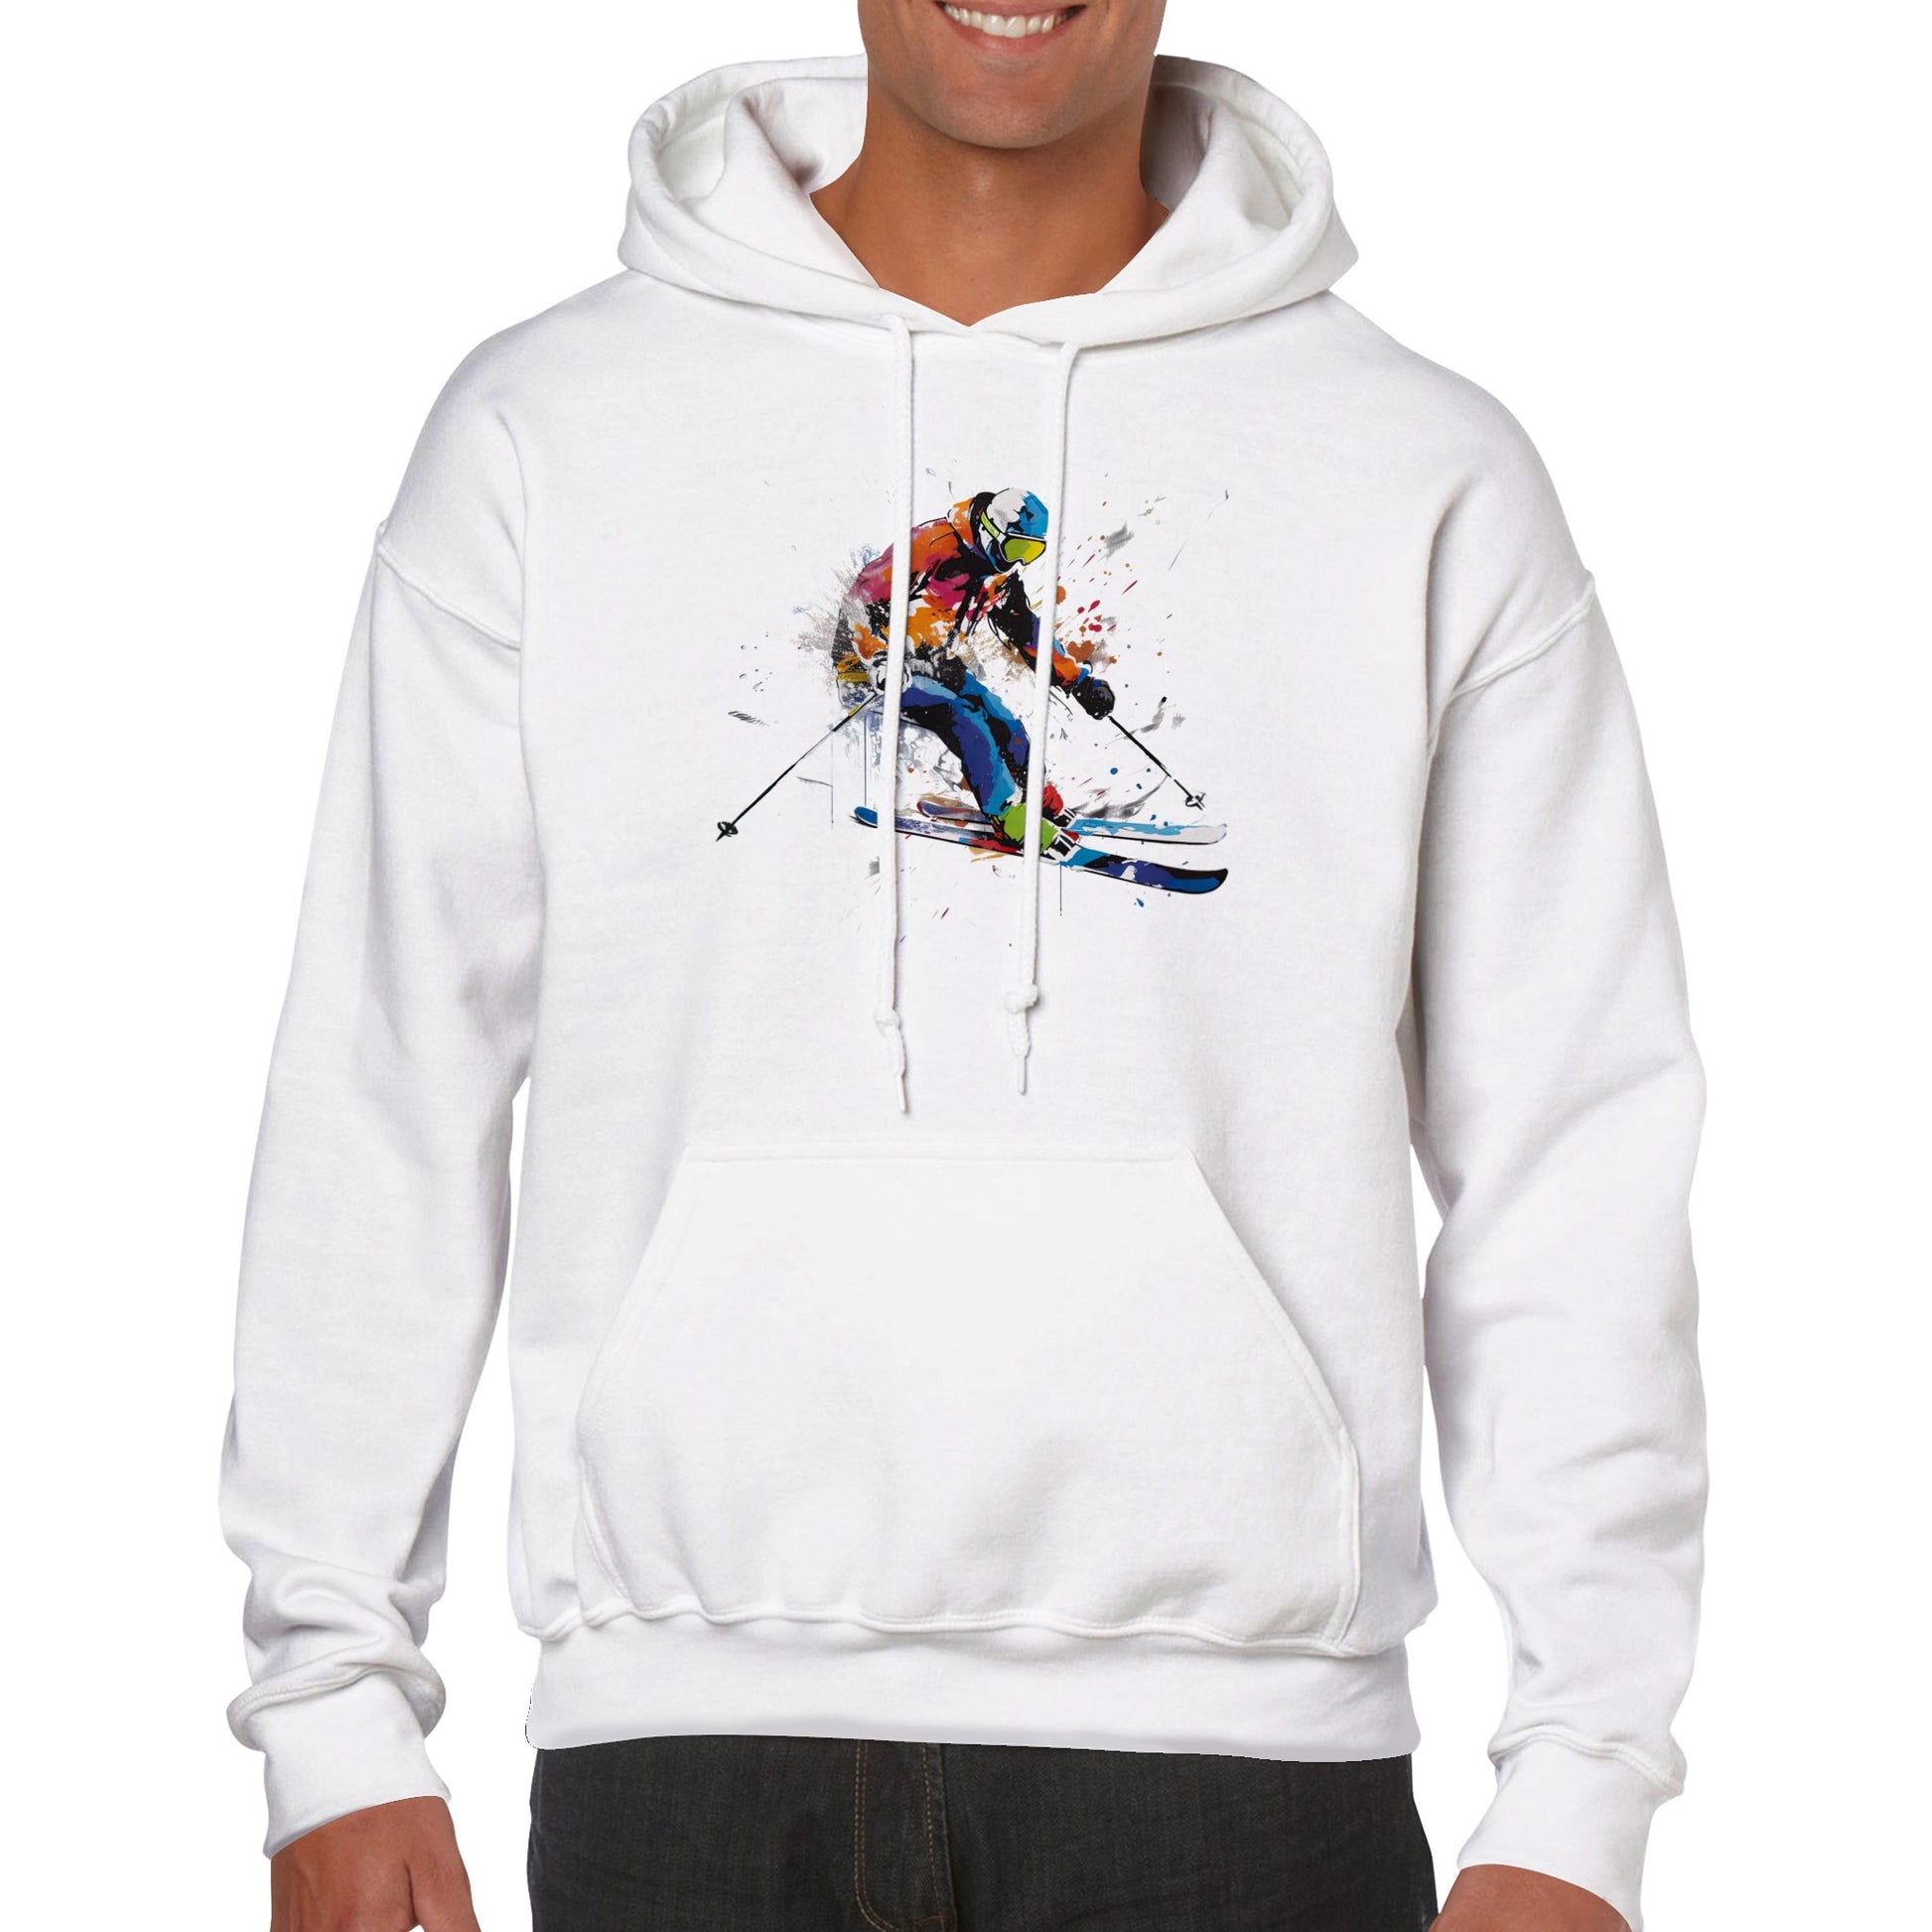 A guy wearing a white hoodie with a skier print